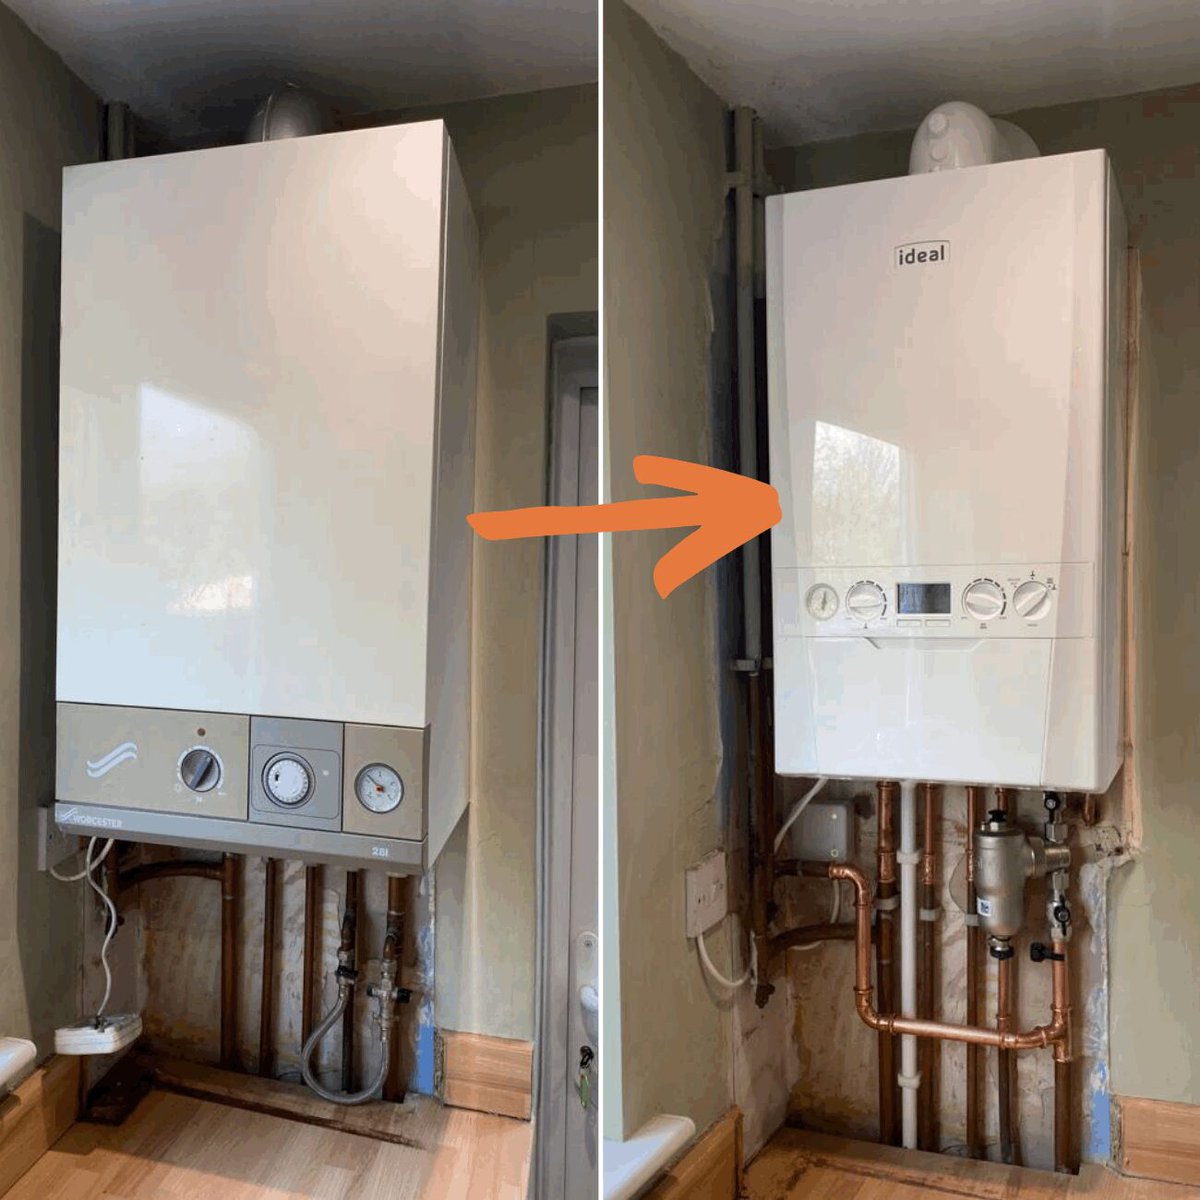 A look back to a before and after 📸 of our client's old boiler replacement with a new Ideal combi boiler.

#gasengineer #plumber #plumbing #heatingengineer #gassafe #gassaferegistered #heating #coulsdon #banstead #caterham #warlingham #whyteleafe #purley #reigate #redhill